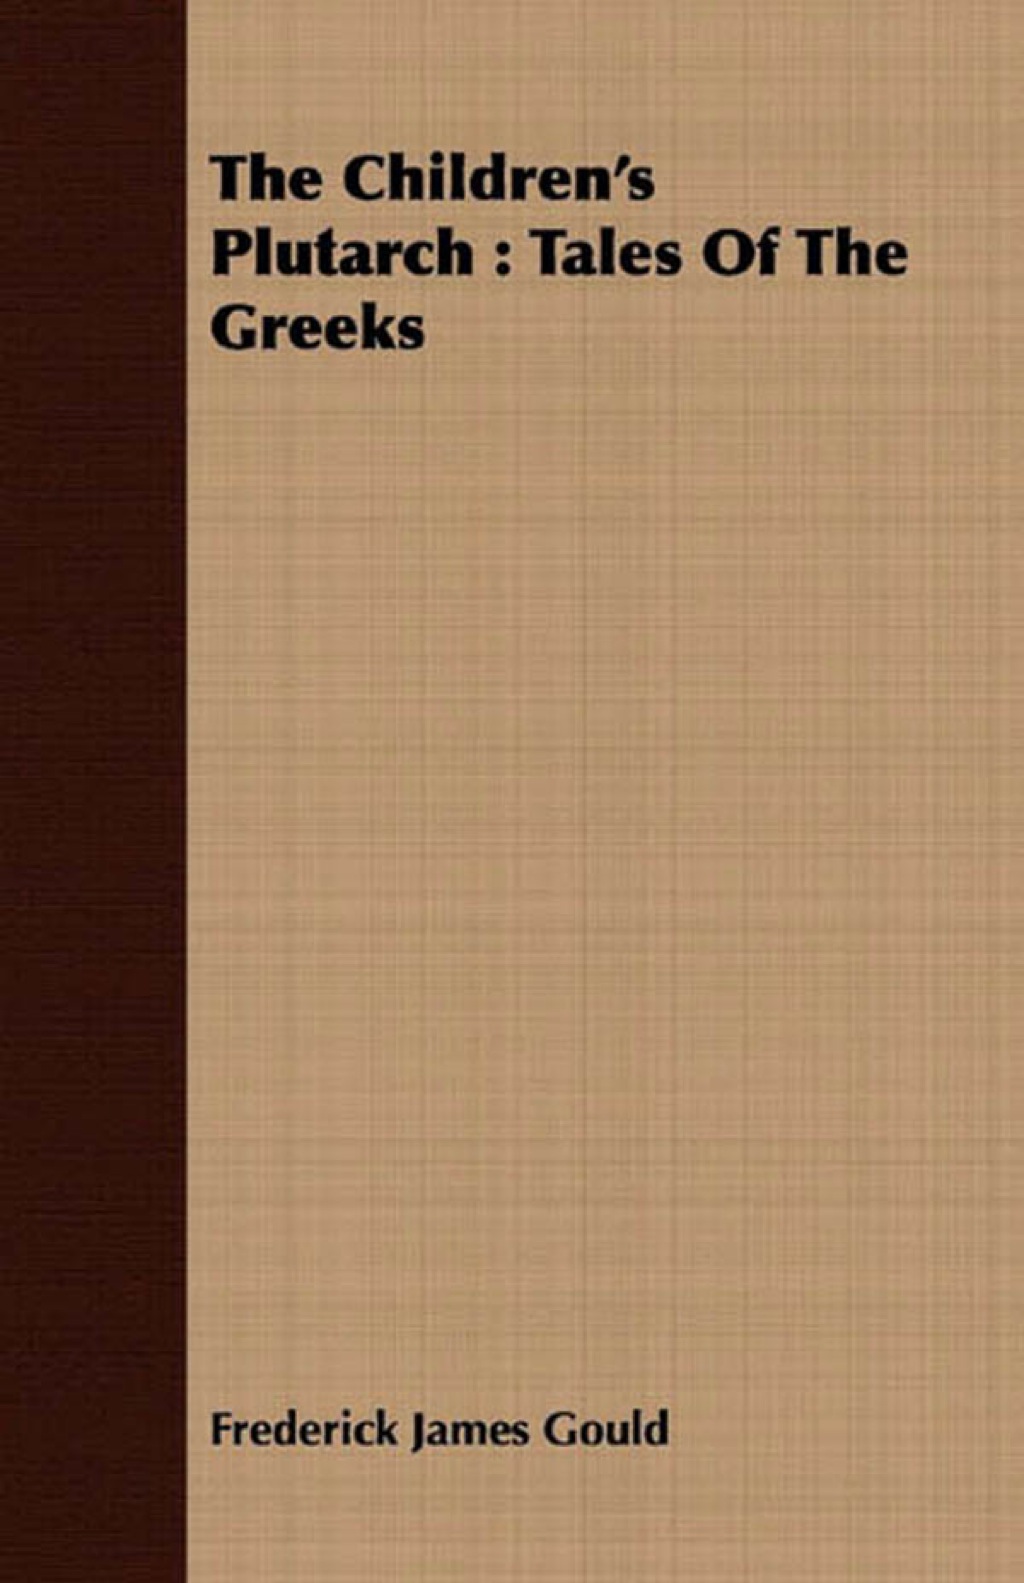 The Children's Plutarch : Tales Of The Greeks (eBook) - Frederick James Gould,